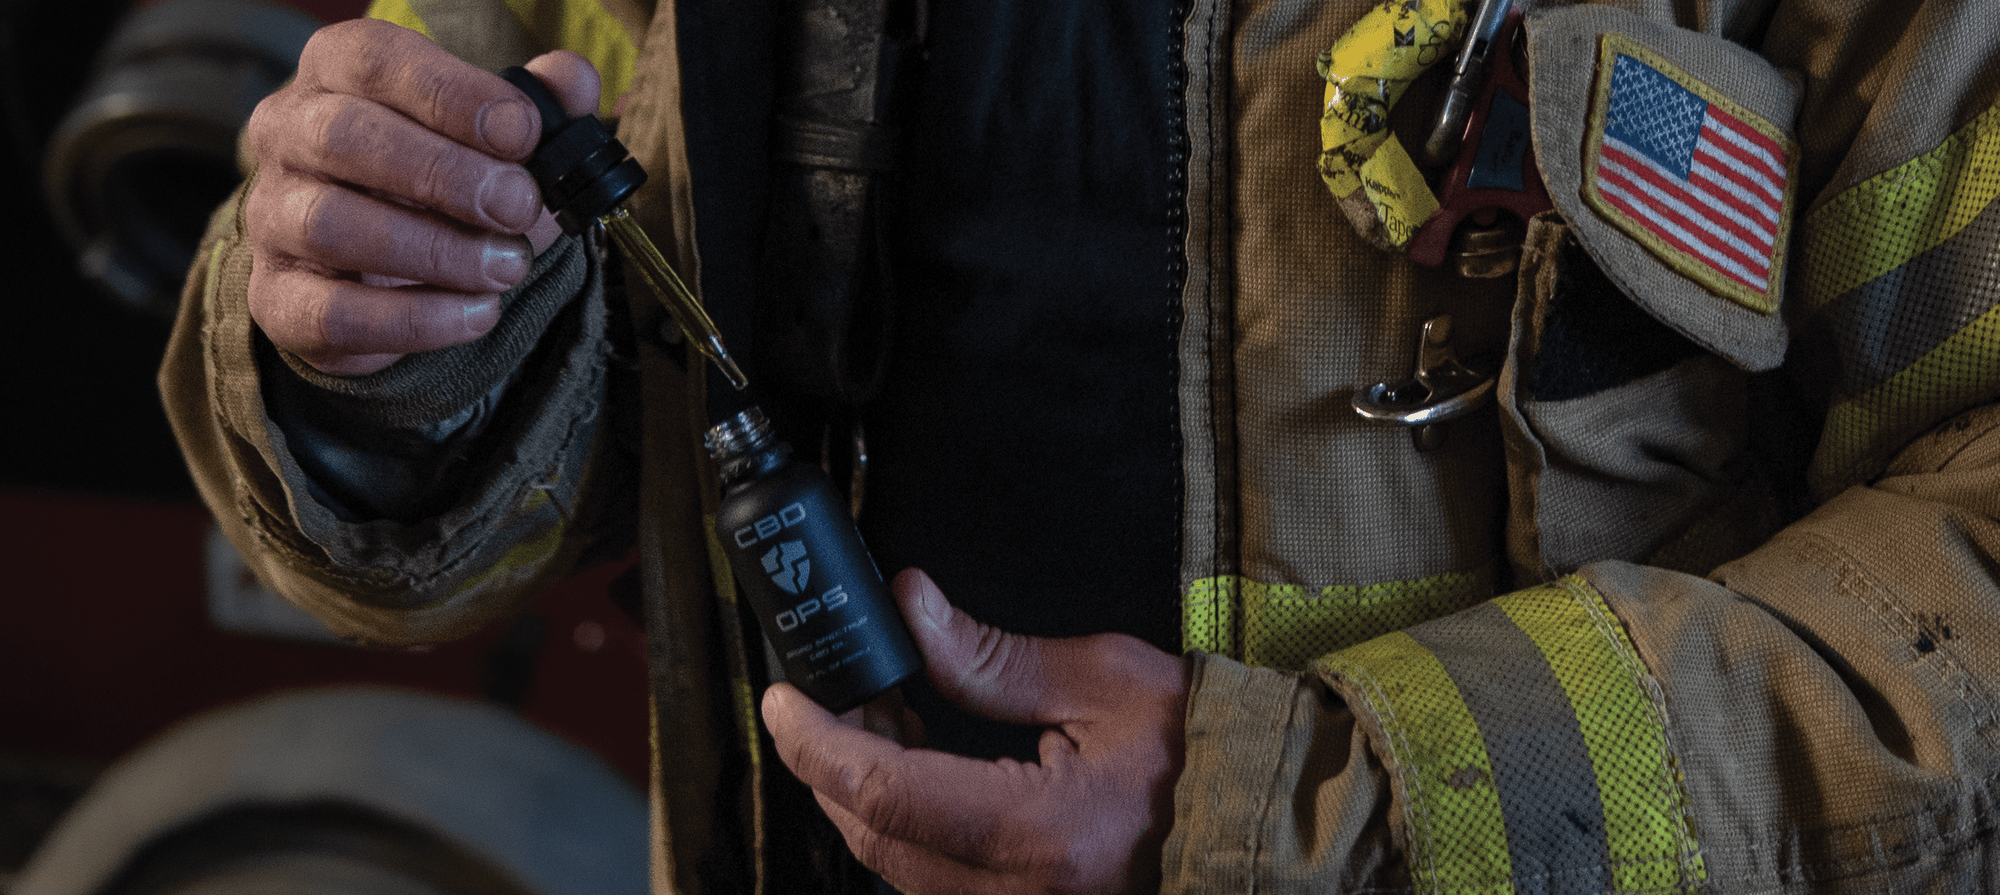 Firefighter taking CBDOps CBD tincture oil created to provide CBD for first responders.